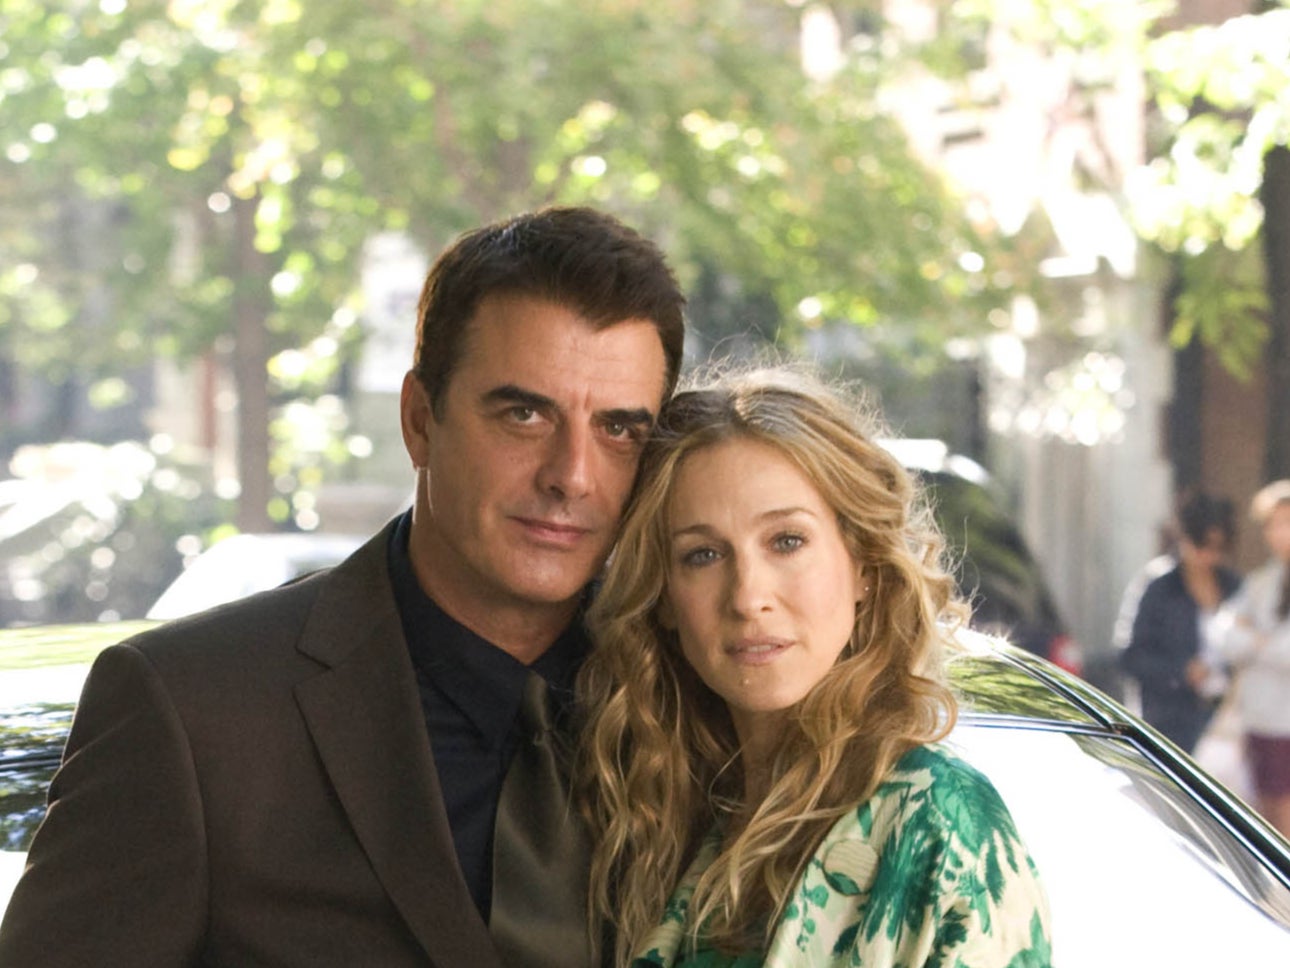 Chris Noth and Sarah Jessica Parker in the ‘Sex and the City’ movie